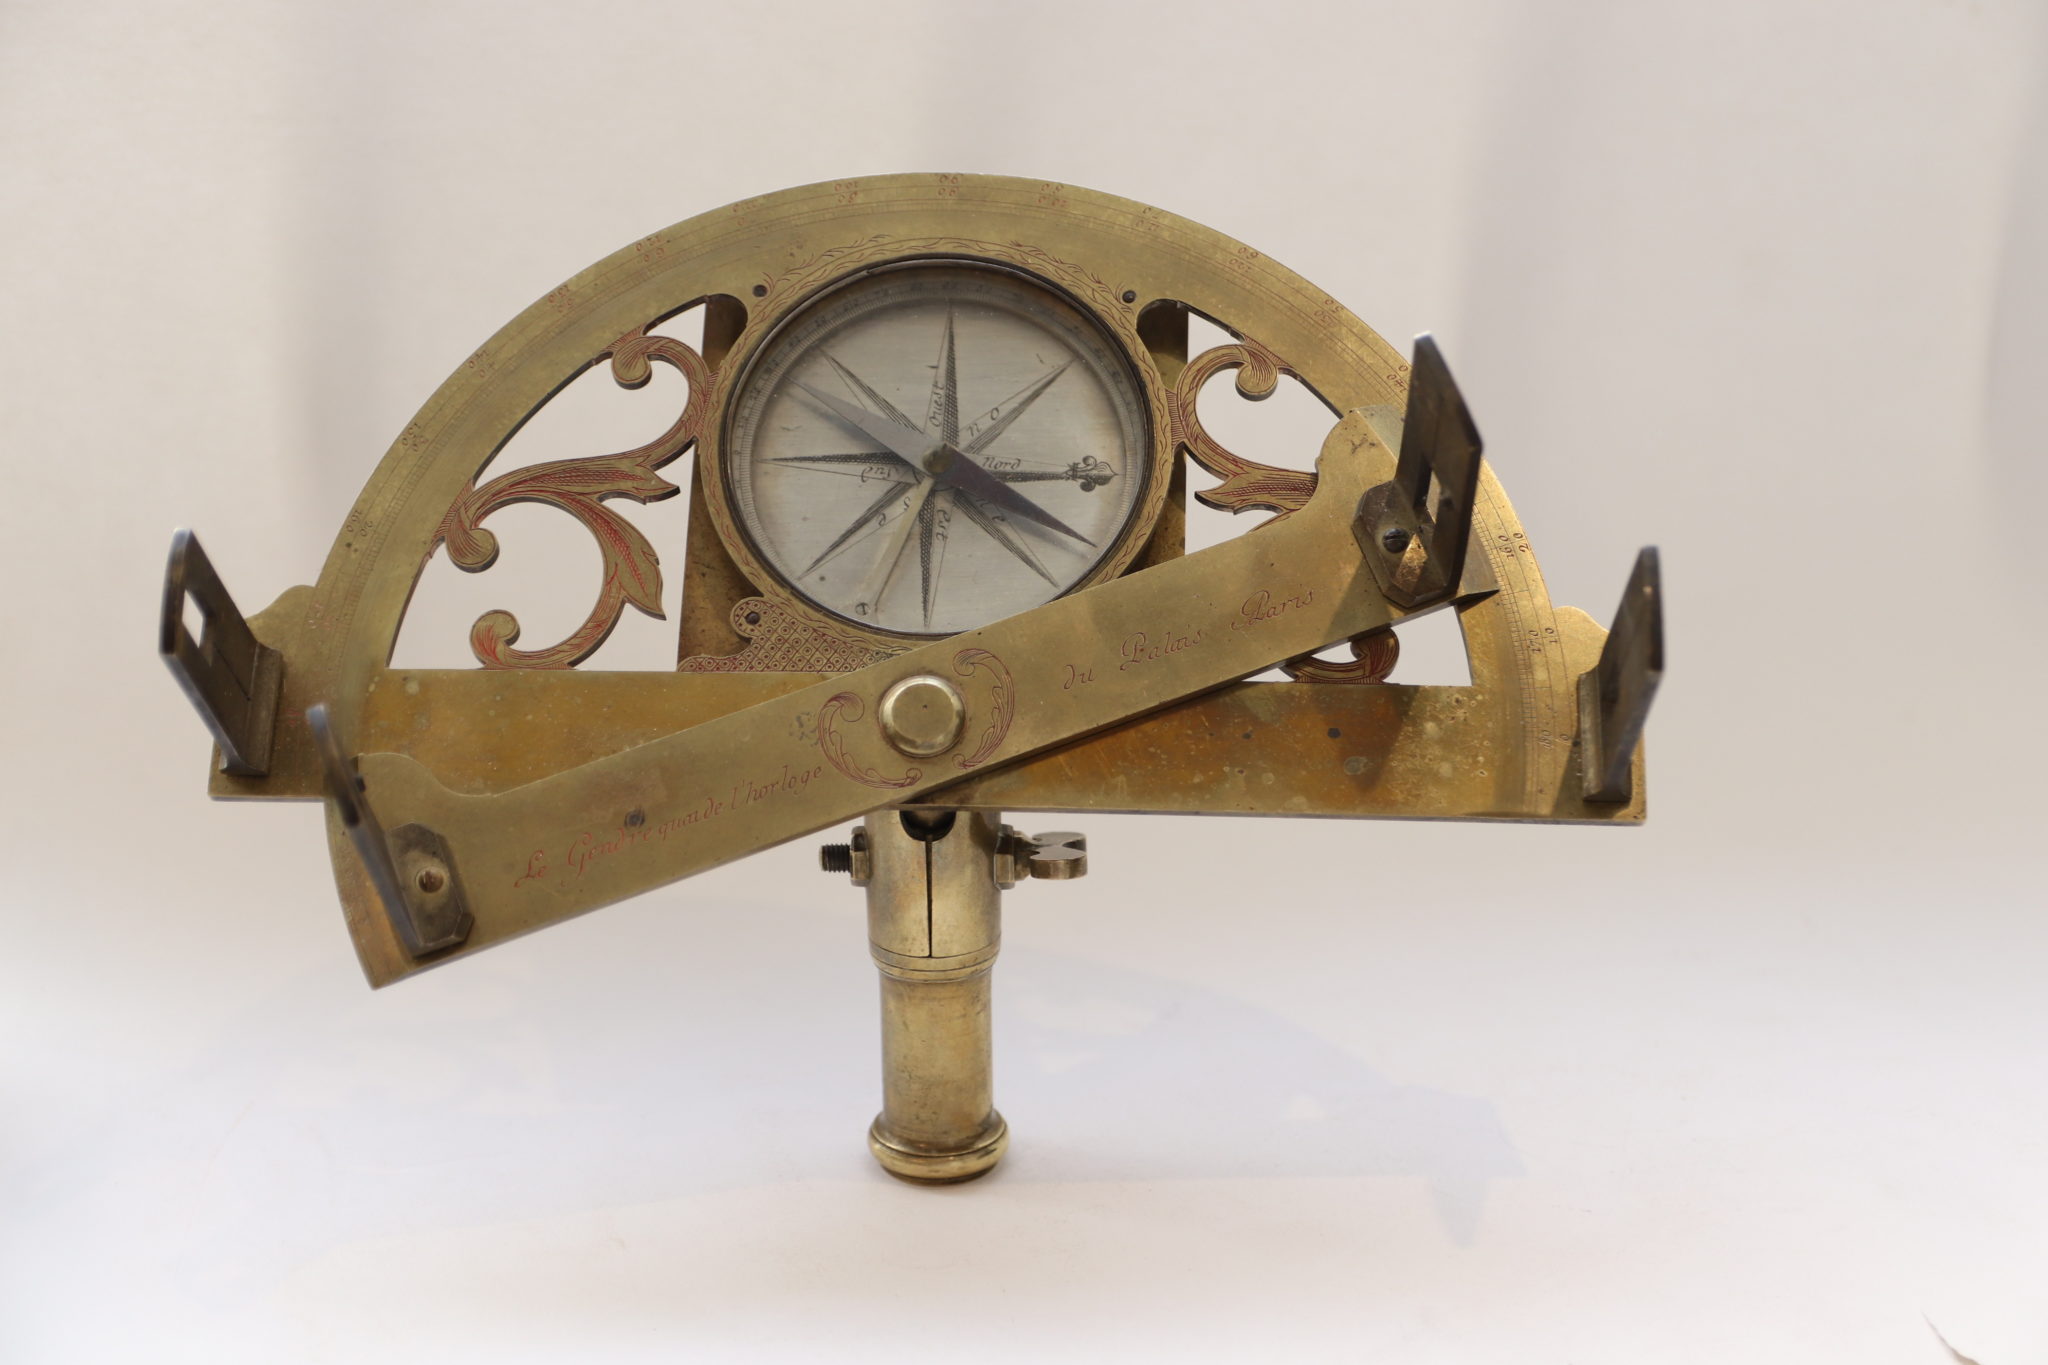 Large Graphometer by Le Gendre, almost unknown French maker, circa 1770